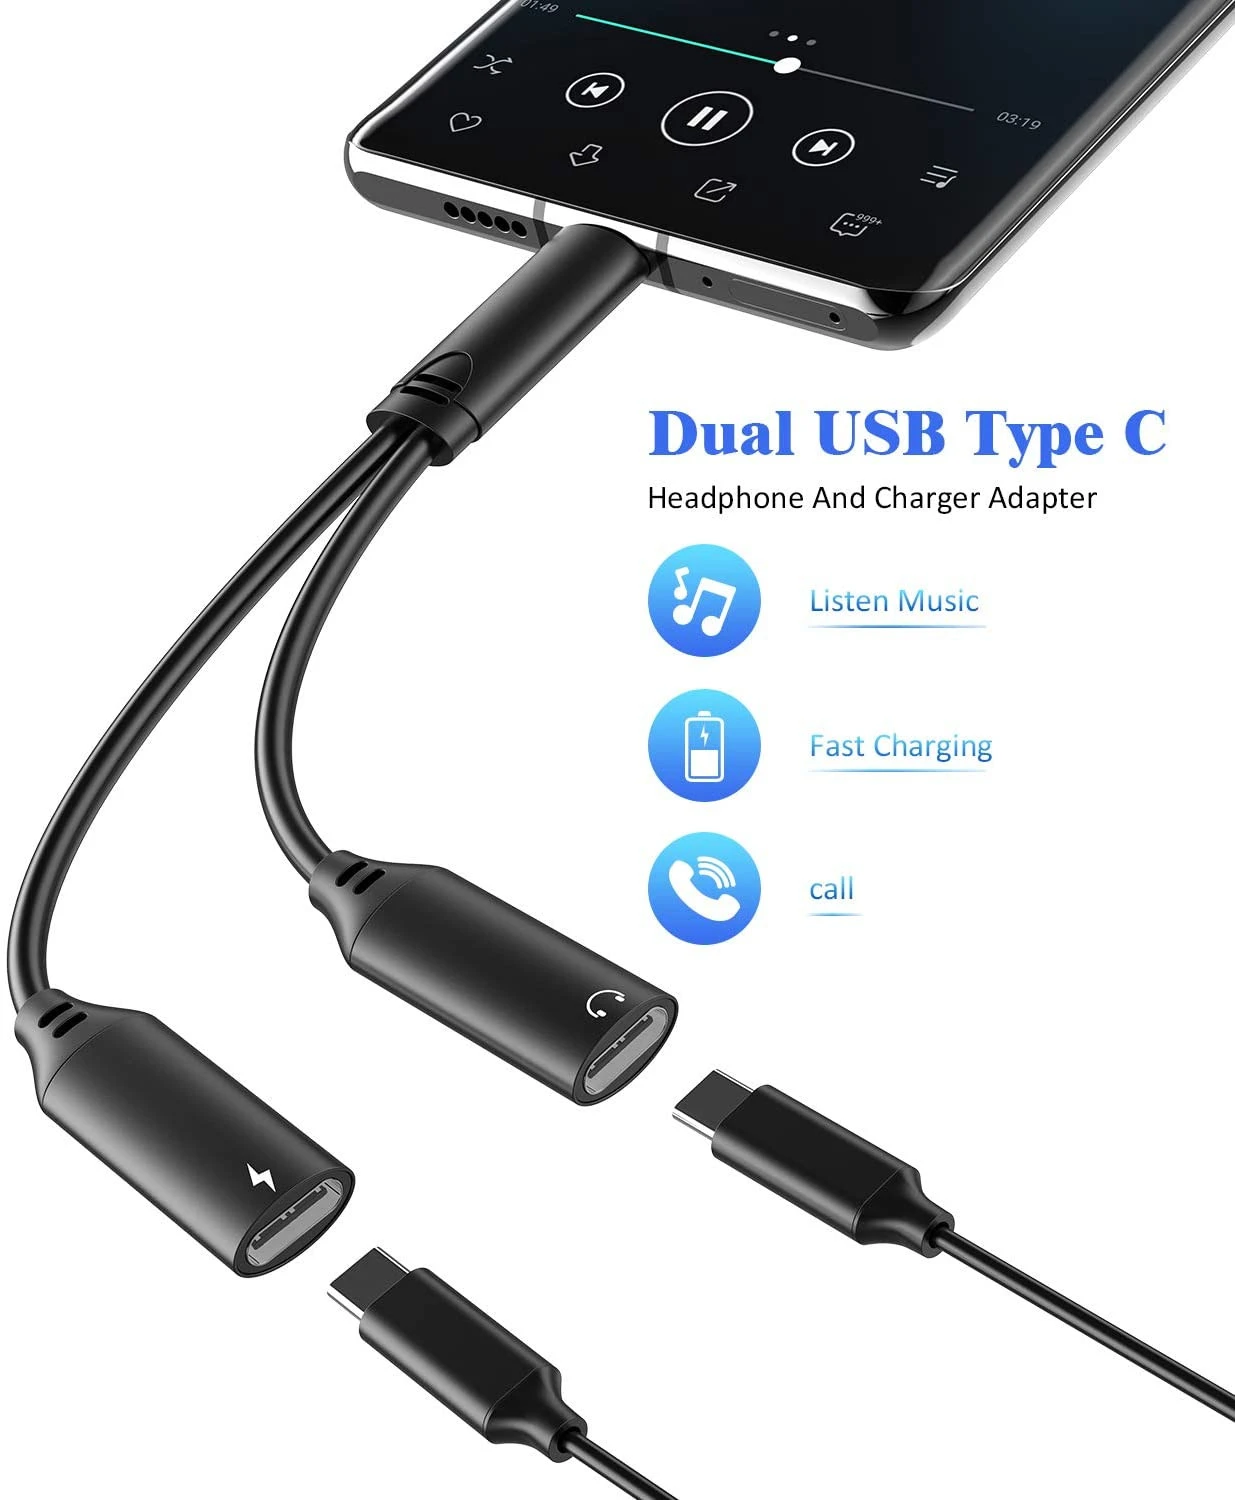 USB C Headphone and Charger Adapter,USB Type C Splitter Audio and Charging Adapter Support Fast Charging,Call,Music Compatible